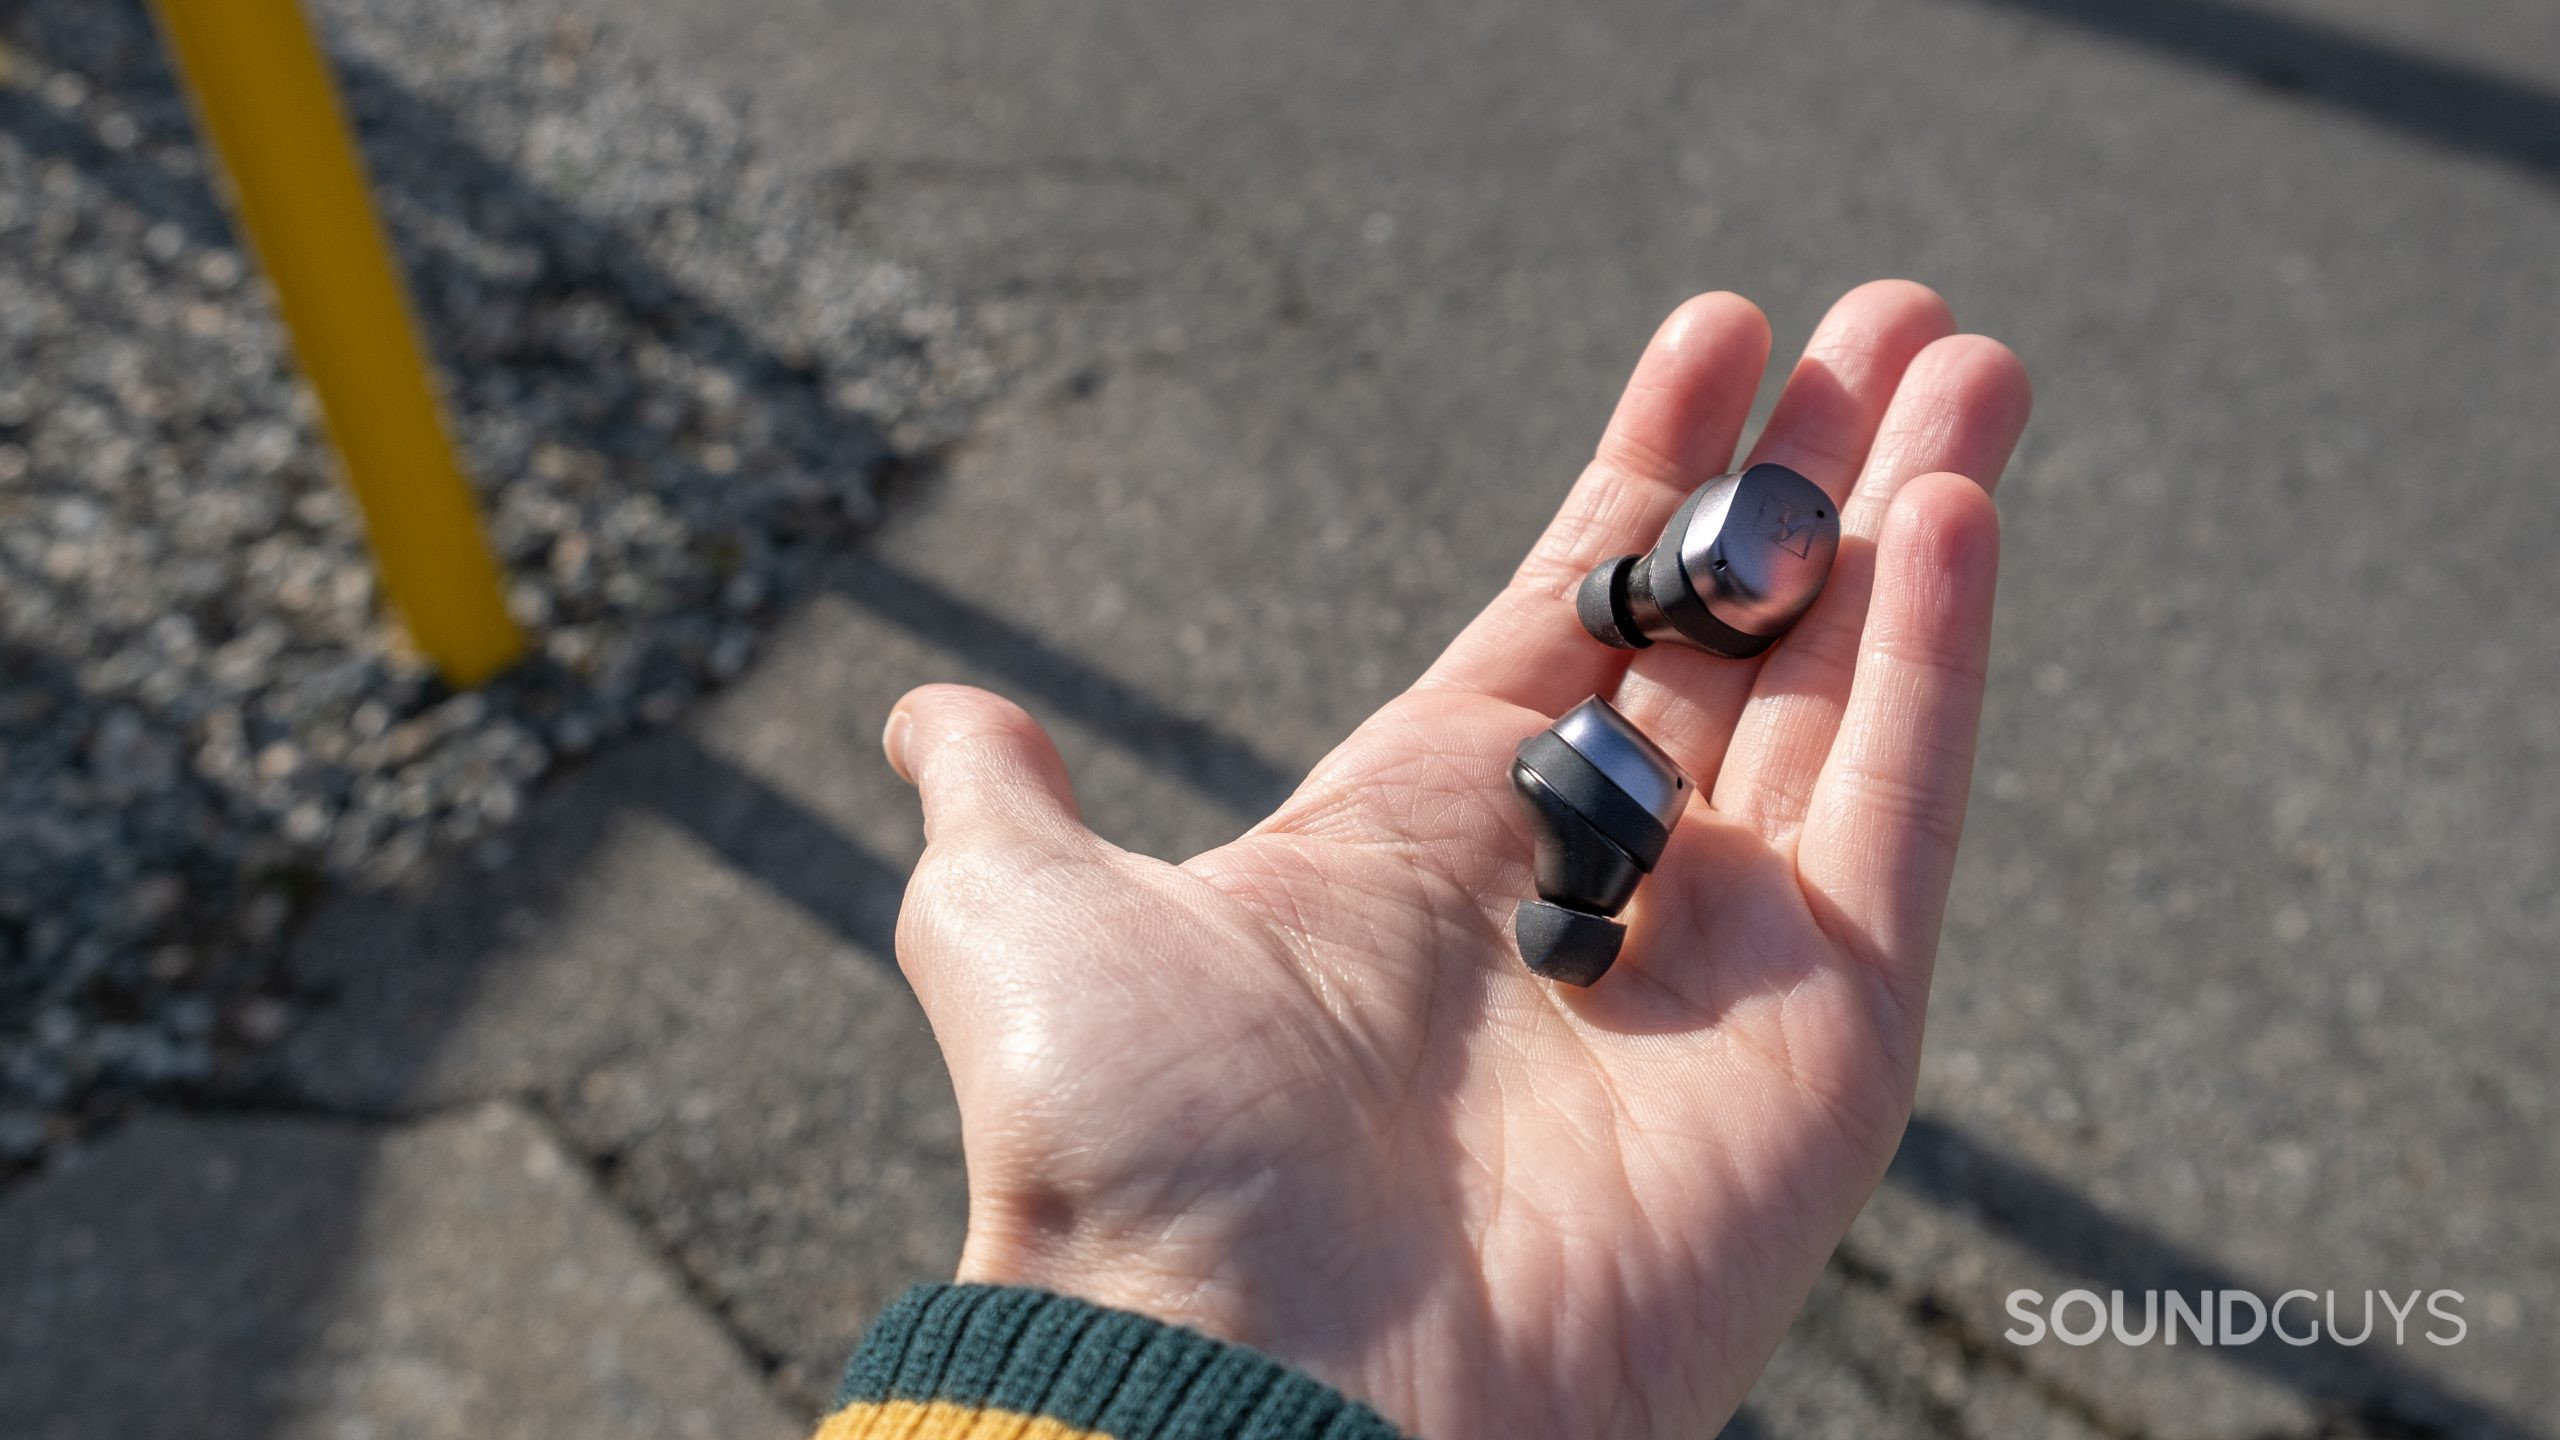 A hand holds the Sennheiser MOMENTUM True Wireless 3 earbuds above concrete.